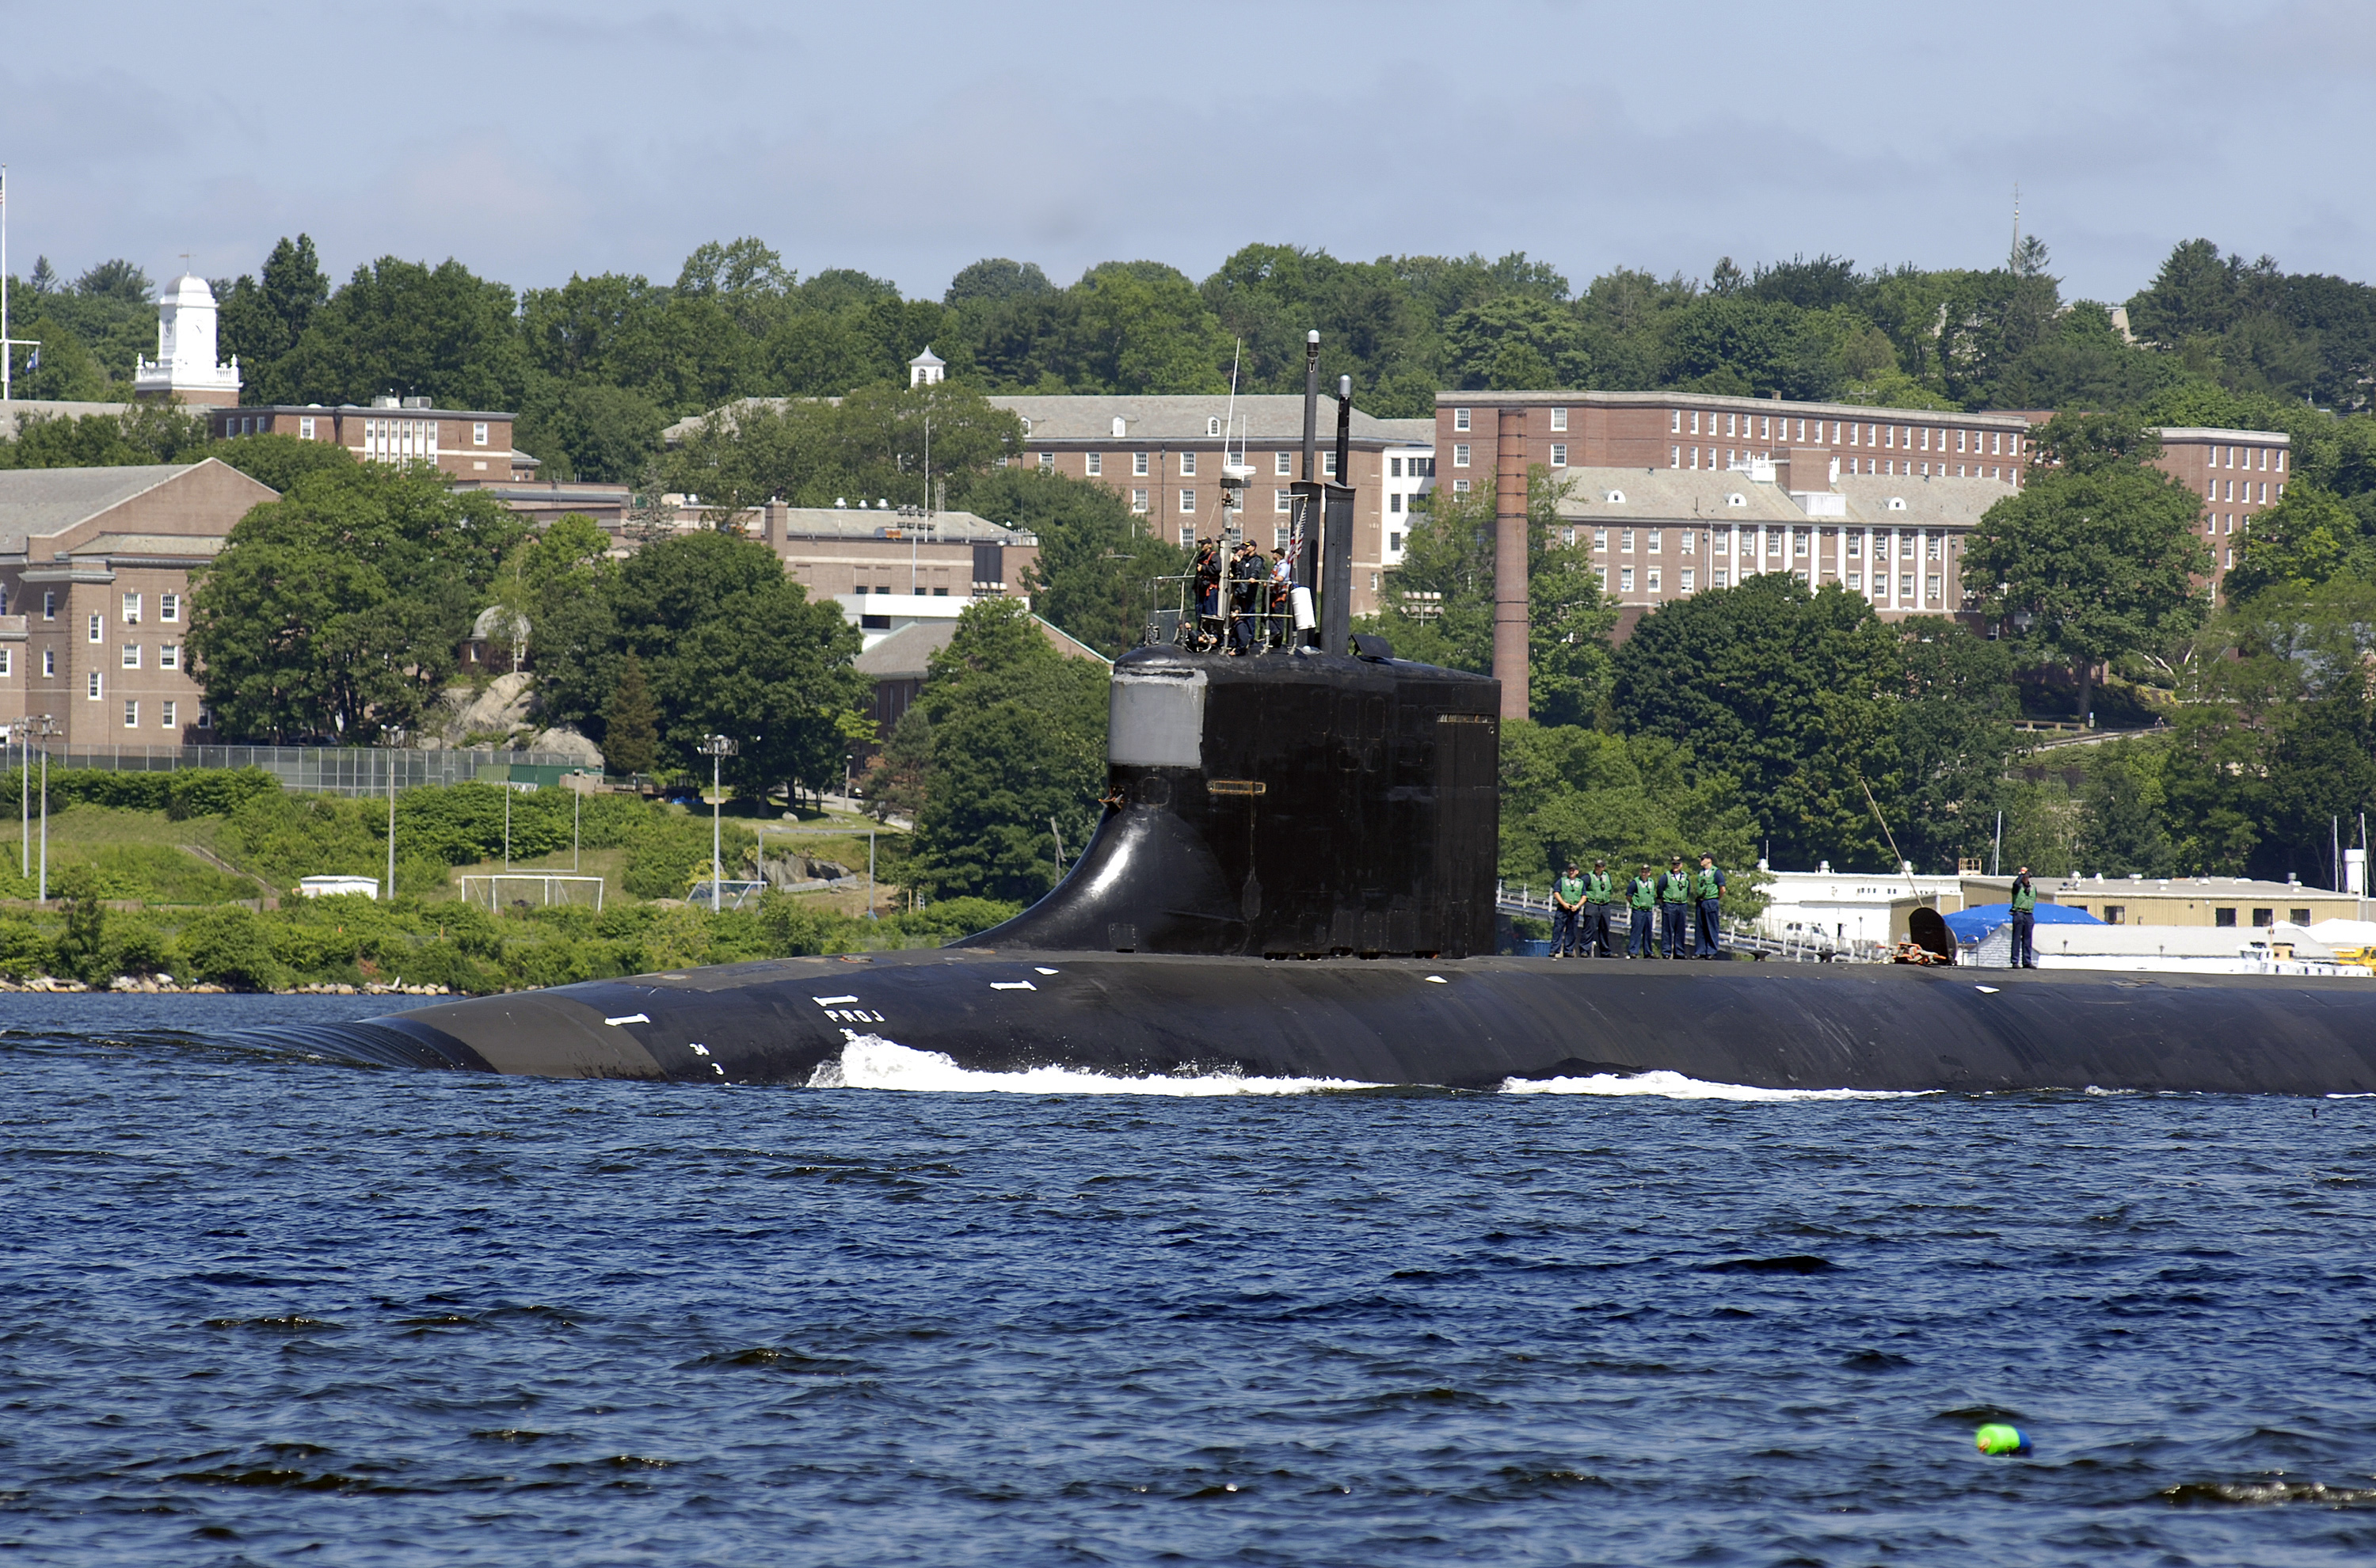 US Navy 070615-N-8467N-003 USS Seawolf (SSN 21) makes her way down the Thames River and past the U.S. Coast Guard Academy